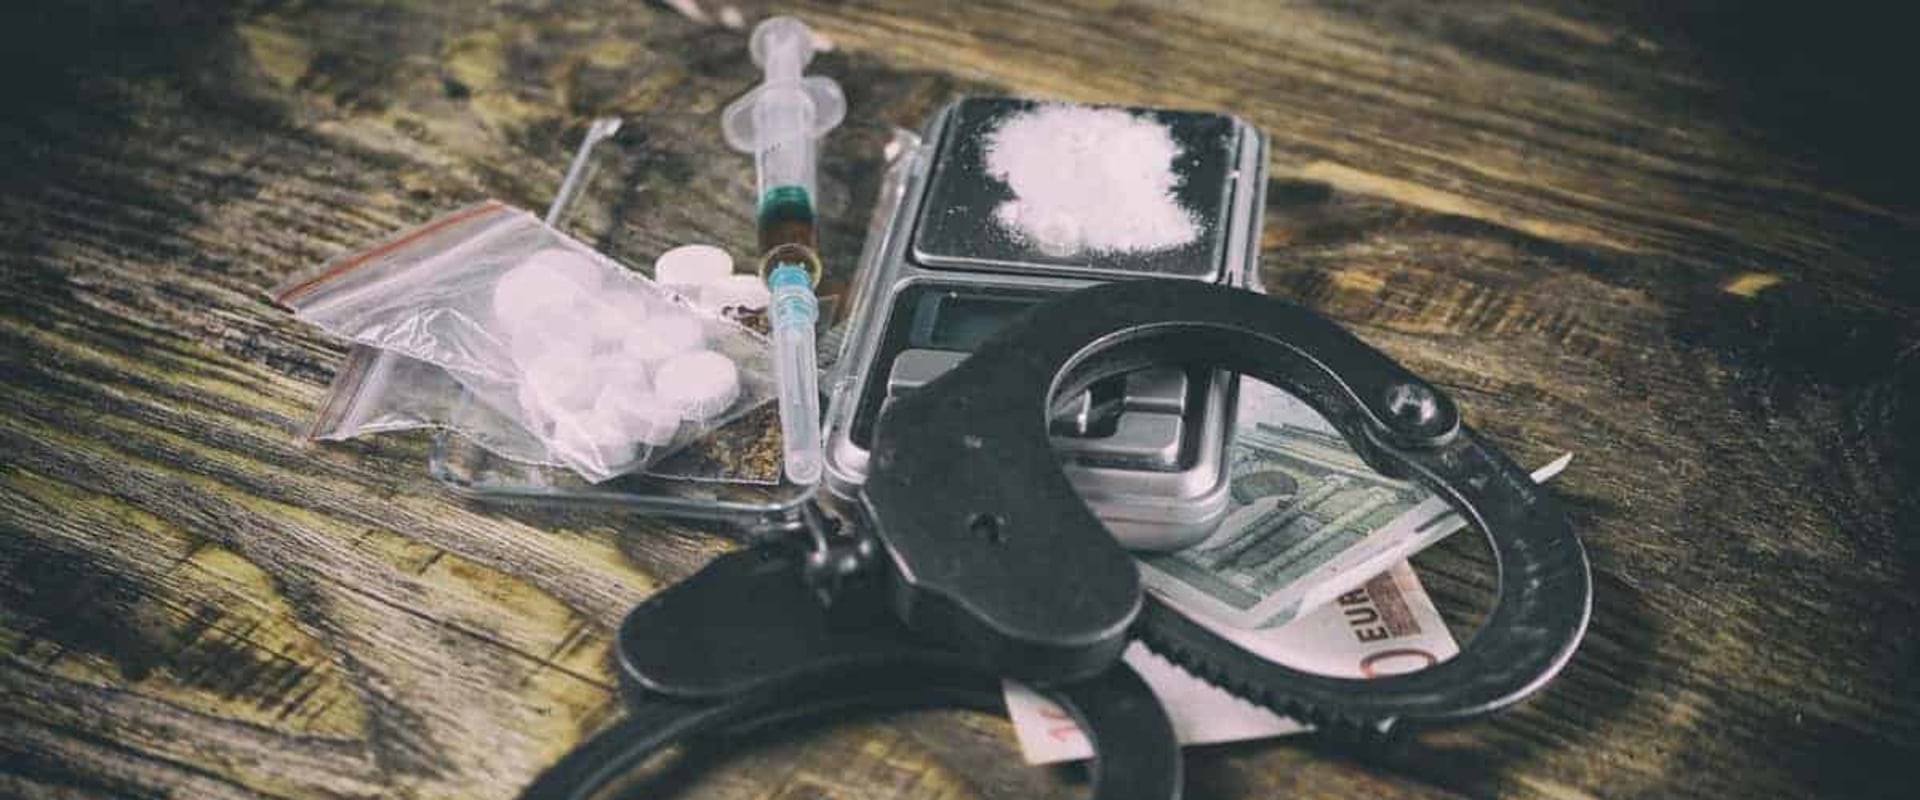 How to get drug possession charges dropped?